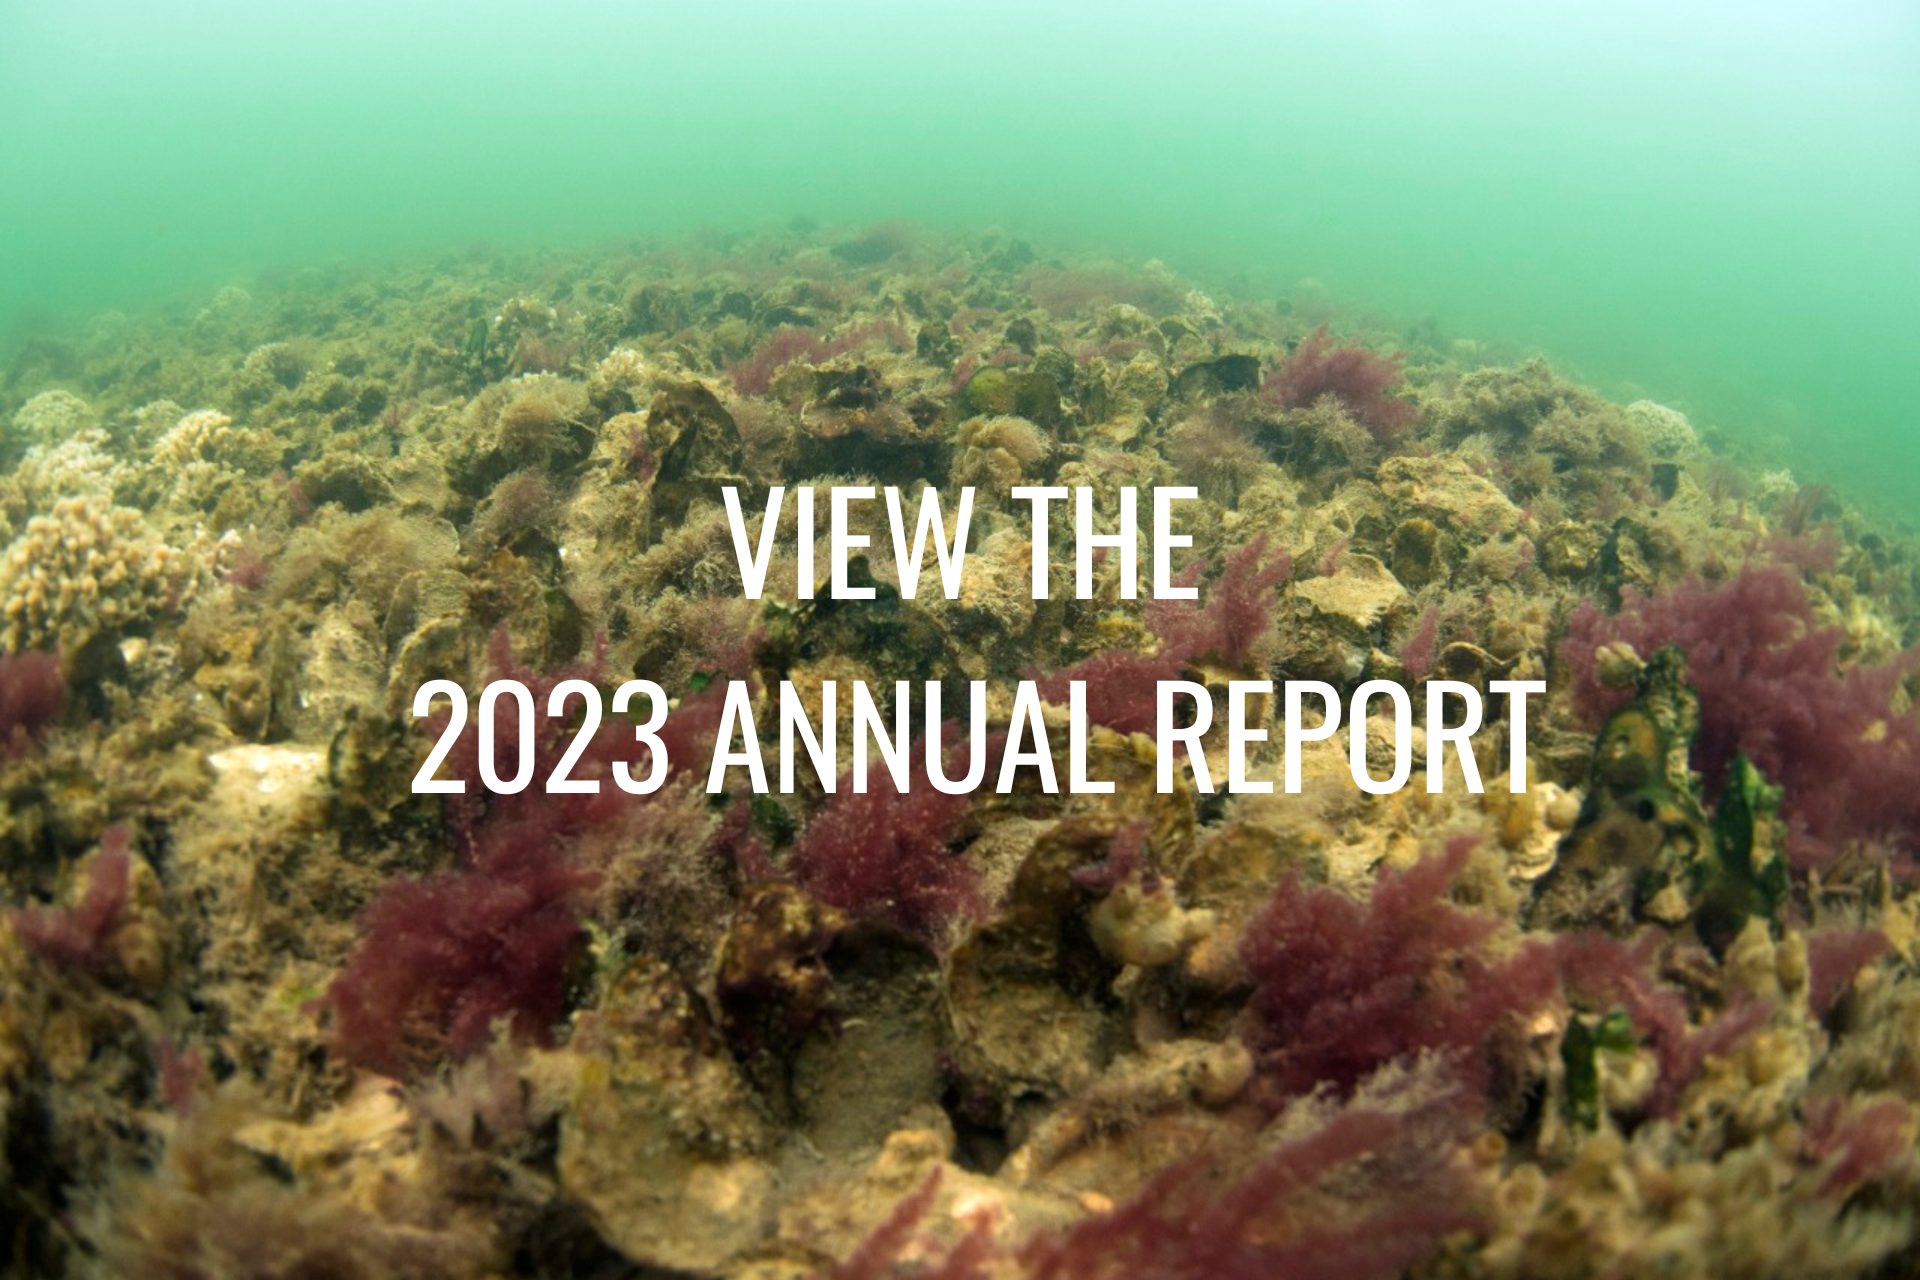 VIEW THE 2023 ANNUAL REPORT (1280)